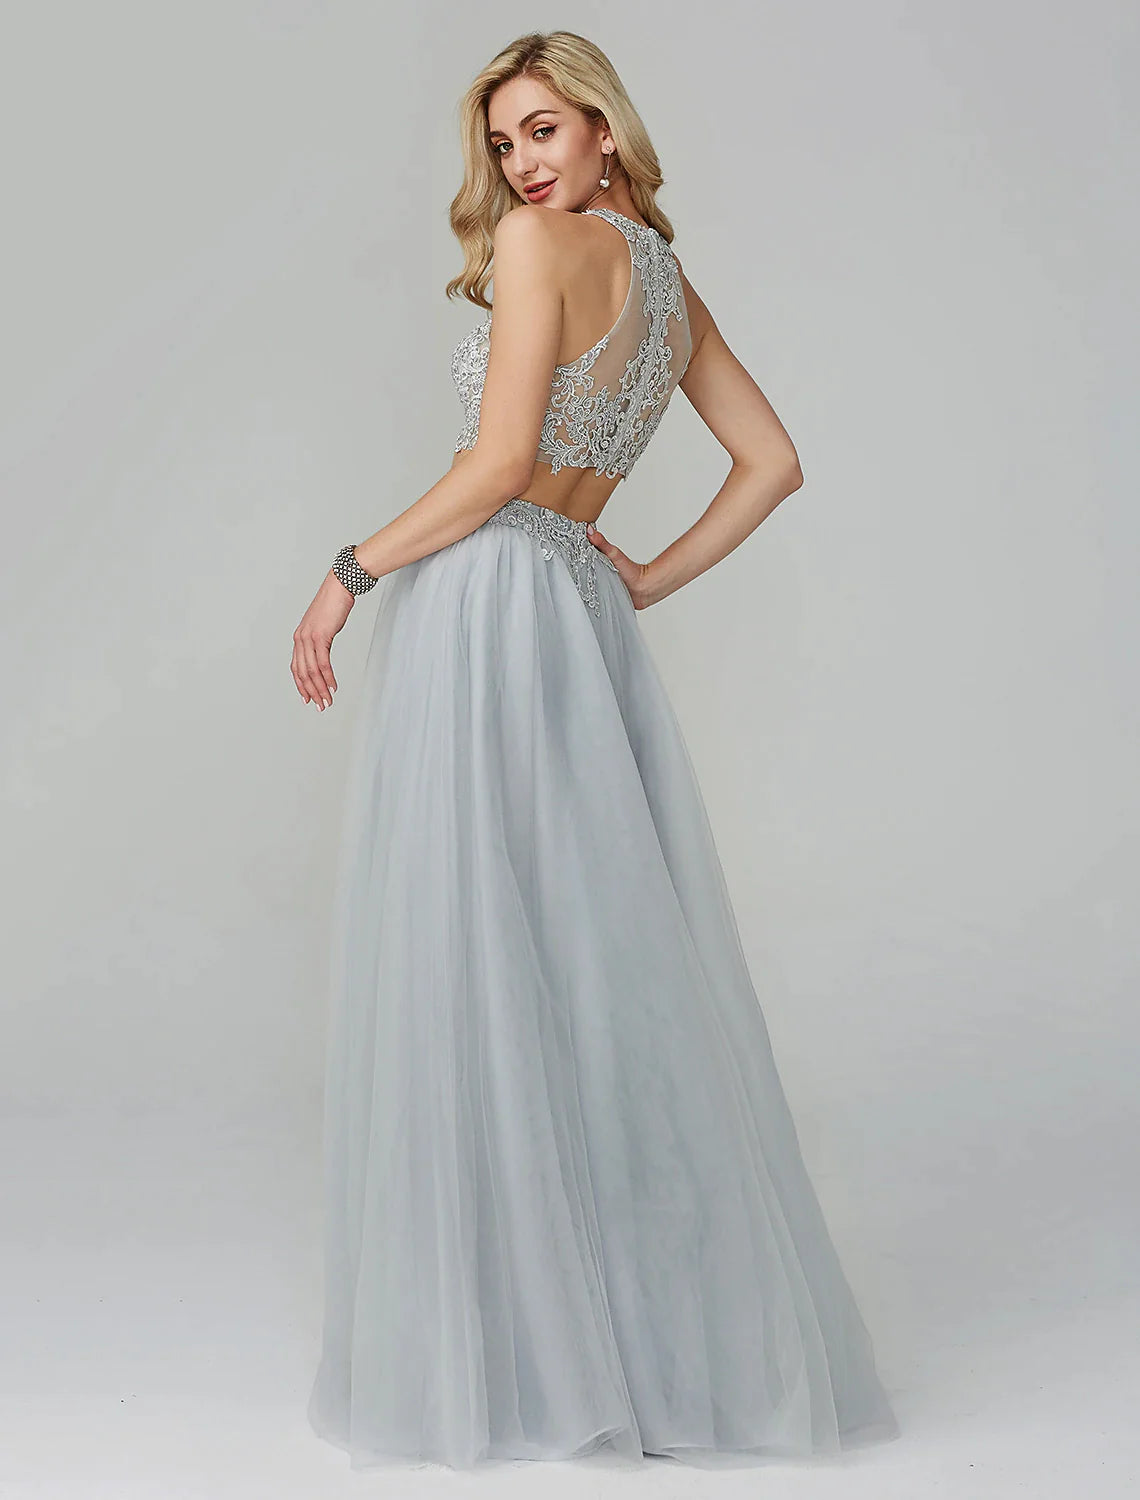 Two Piece Empire Prom Formal Evening Dress Halter Neck Sleeveless Floor Length Lace with Appliques